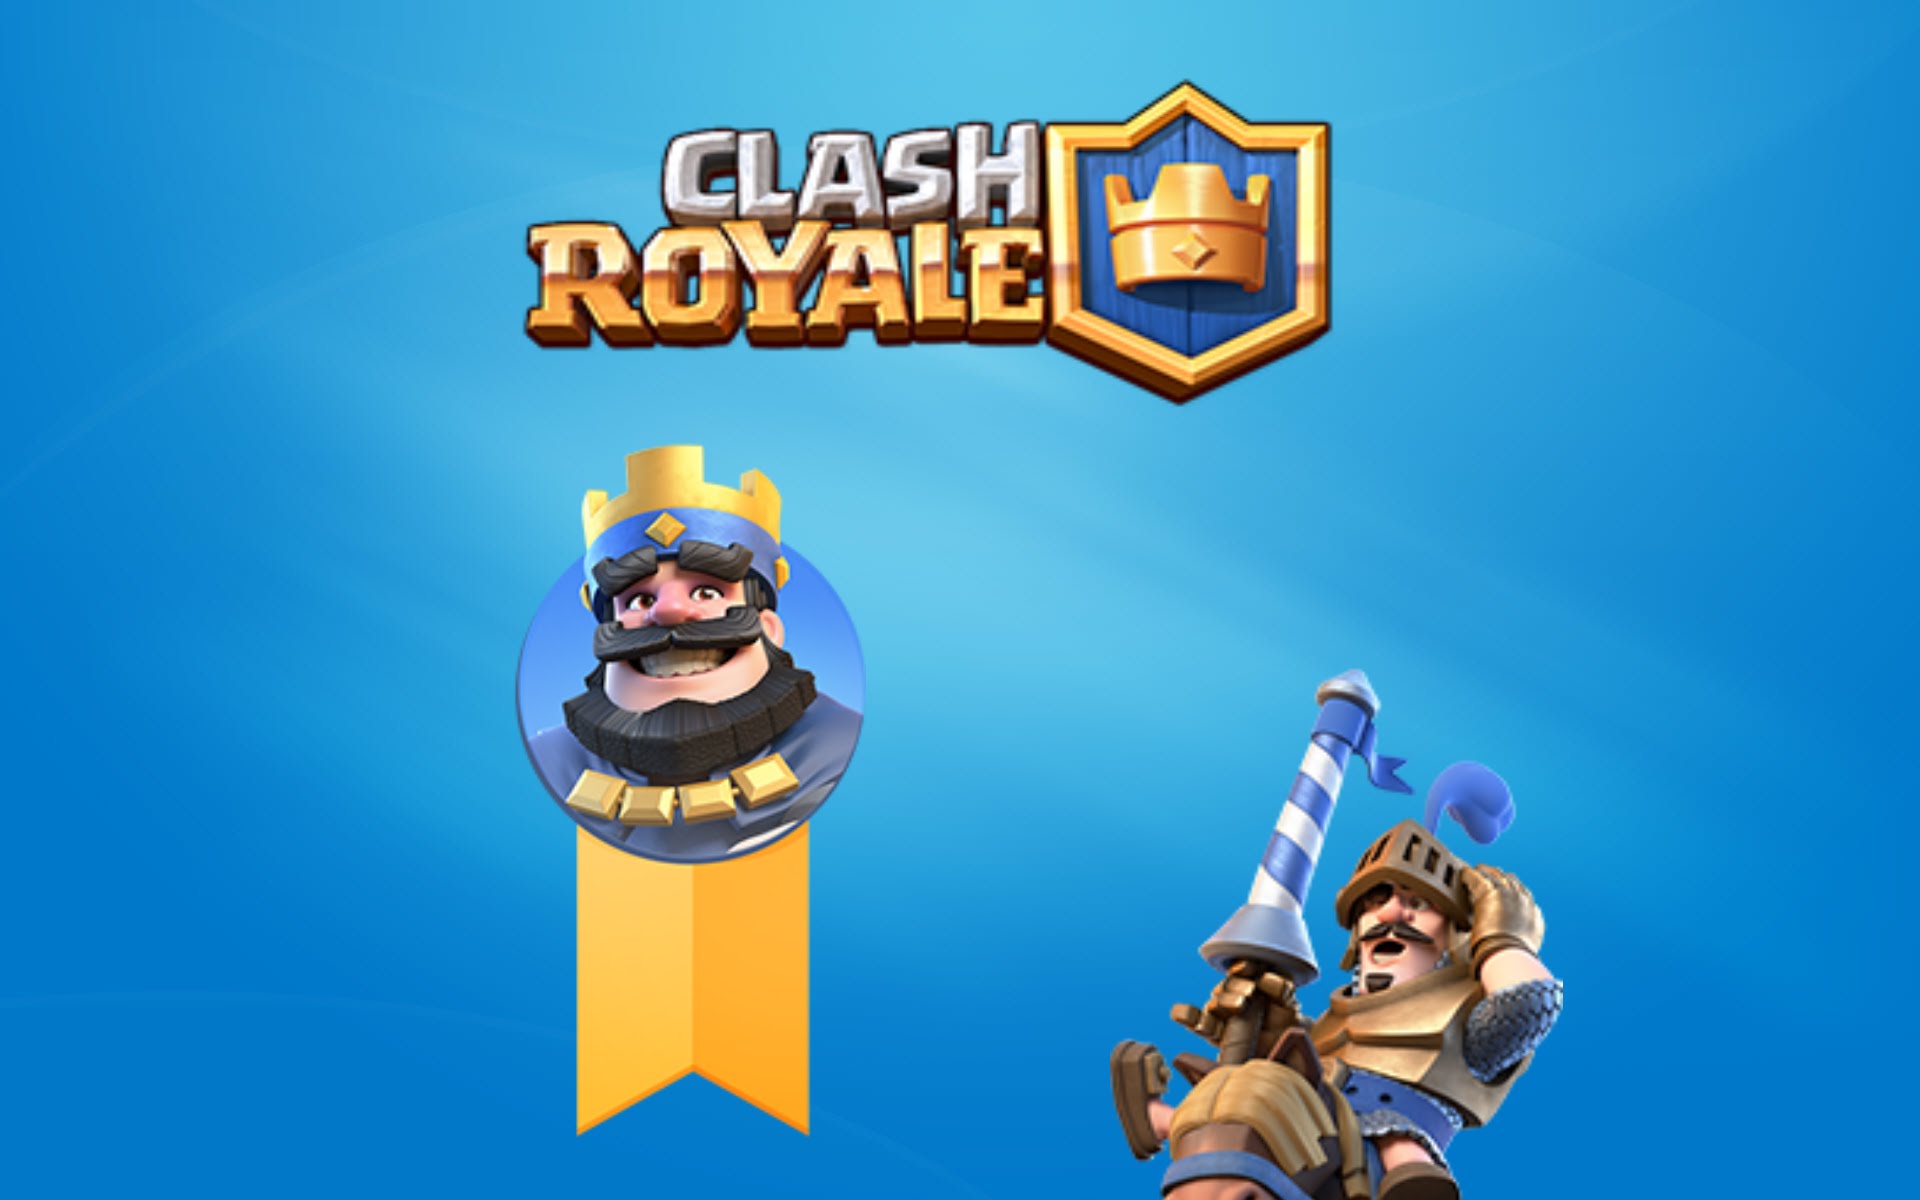 Wonderful Clash Royale Wallpaper Full HD Pictures